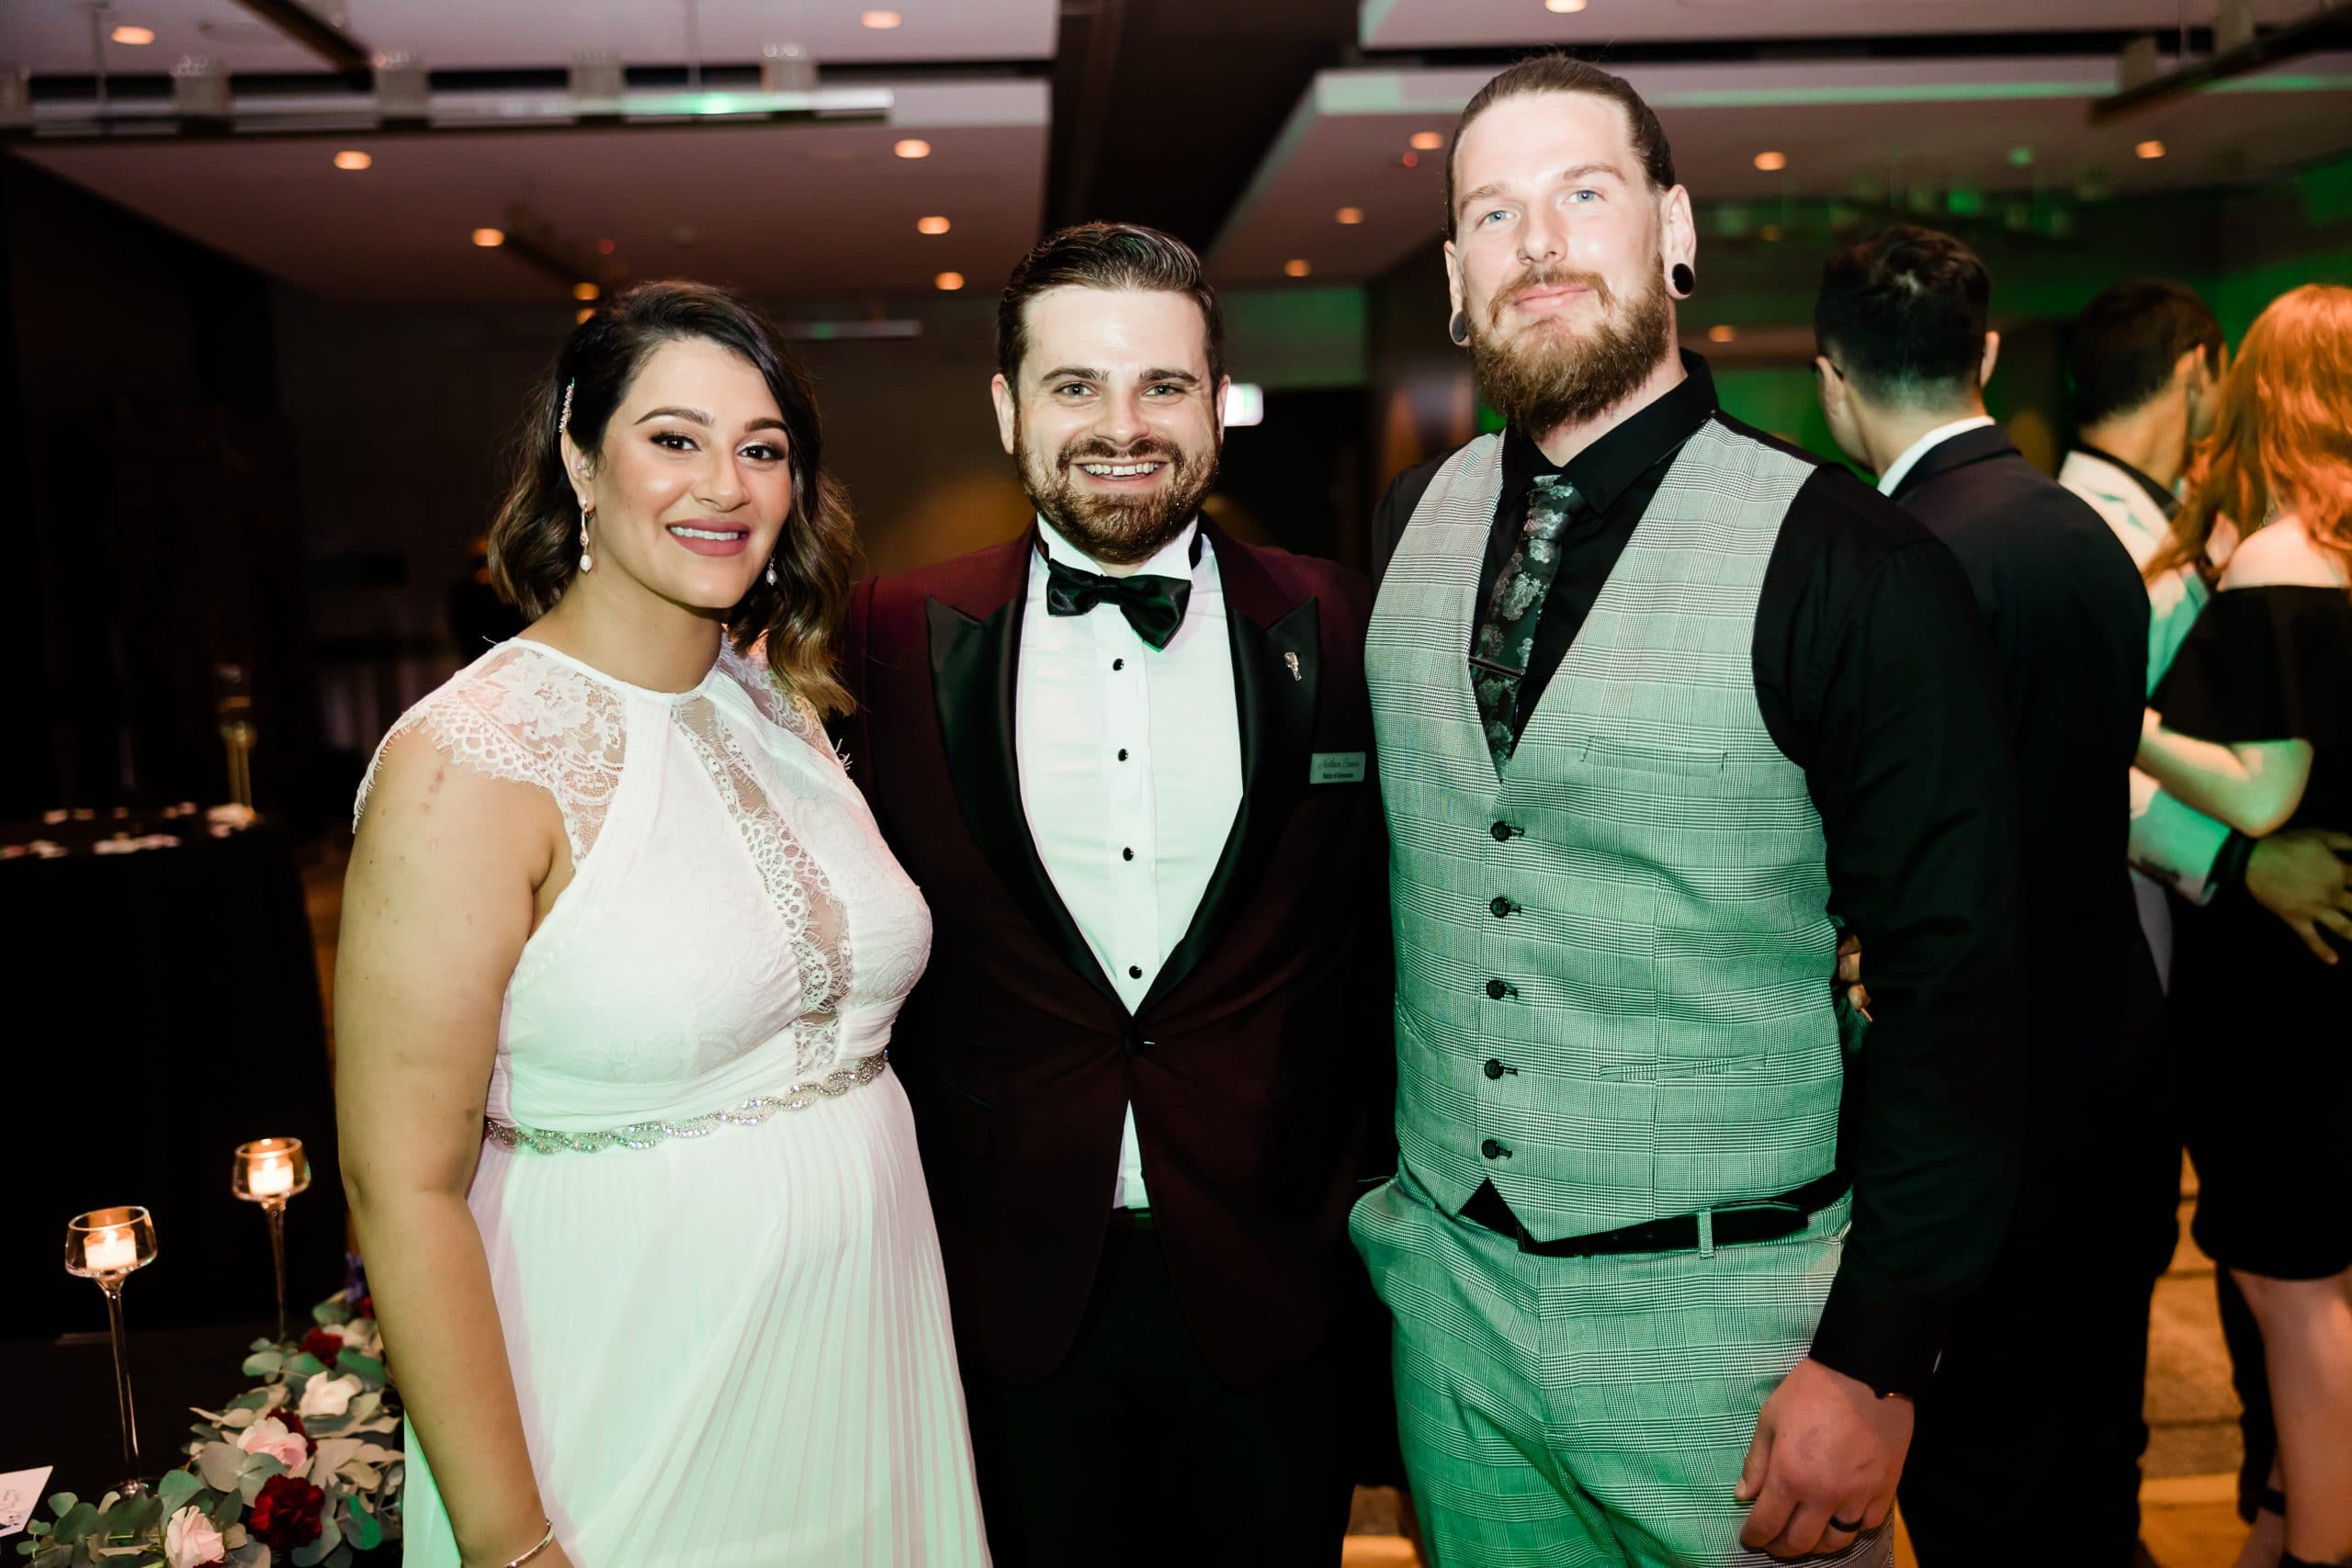 Nathan Cassar posing with bride and groom, Raina and Brodie